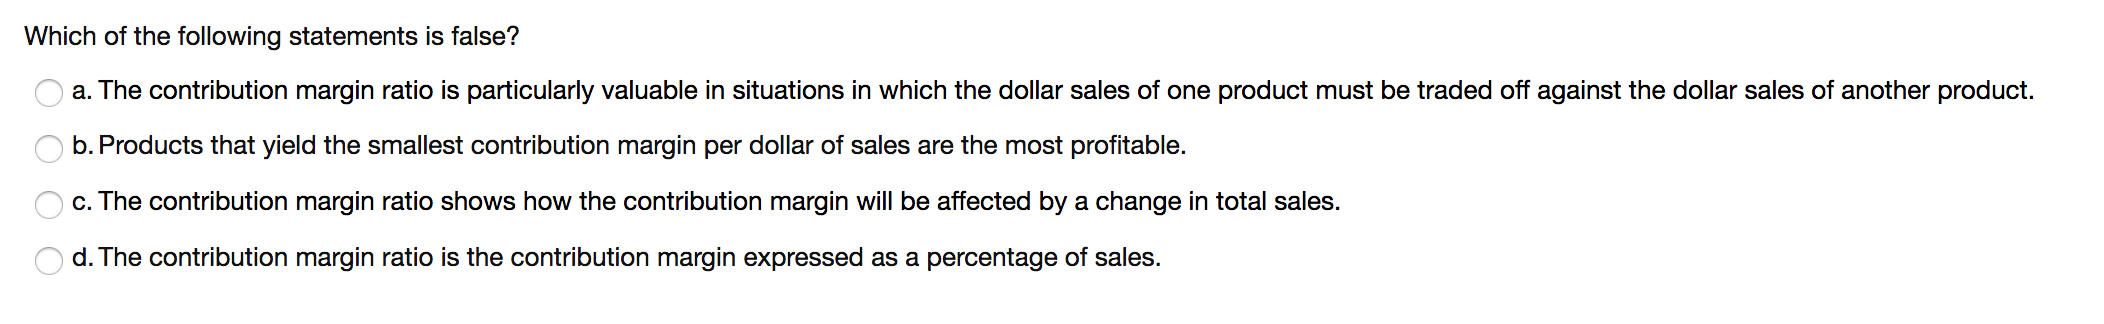 Which of the following statements is false?
a. The contribution margin ratio is particularly valuable in situations in which the dollar sales of one product must be traded off against the dollar sales of another product.
b. Products that yield the smallest contribution margin per dollar of sales are the most profitable.
c. The contribution margin ratio shows how the contribution margin will be affected by a change in total sales.
d. The contribution margin ratio is the contribution margin expressed as a percentage of sales.
